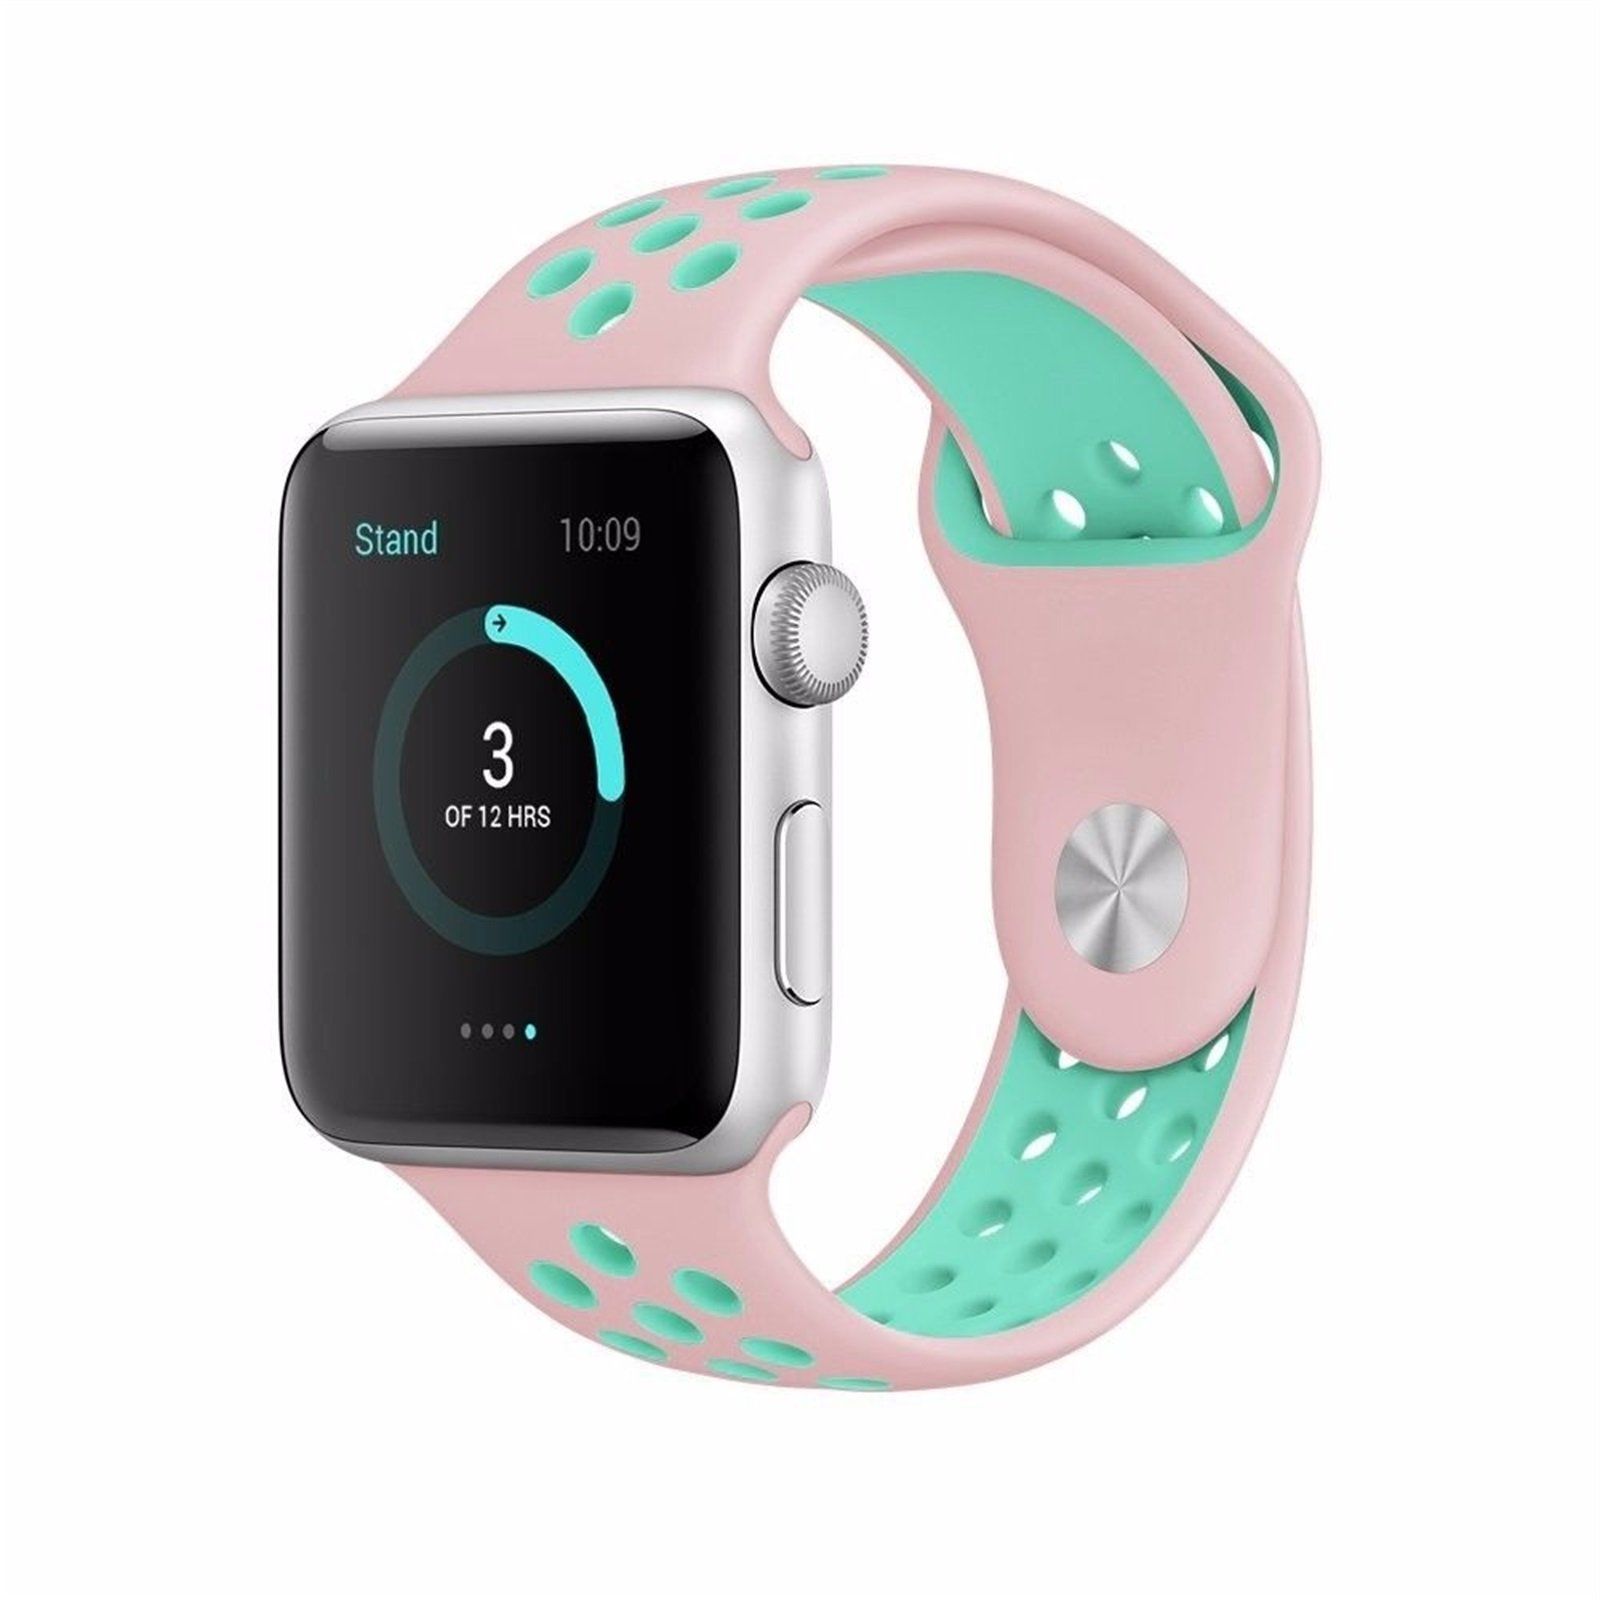 iWatch Silicone Watchband Replacement Wrist Strap for Apple Watch 38mm - Pink + Green